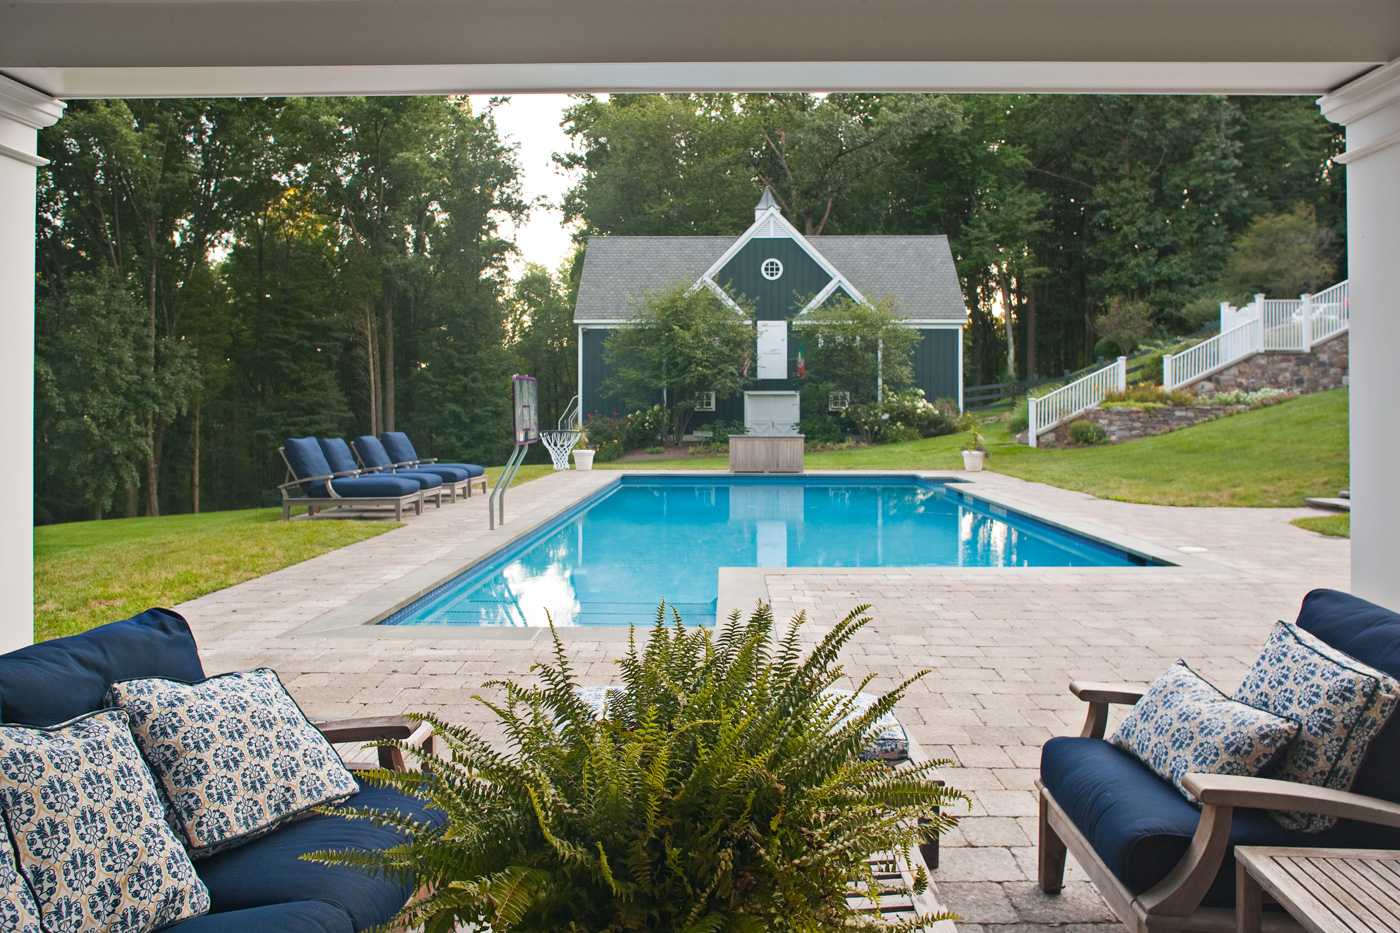 Formal Swimming Pool - New Jersey Landscaping